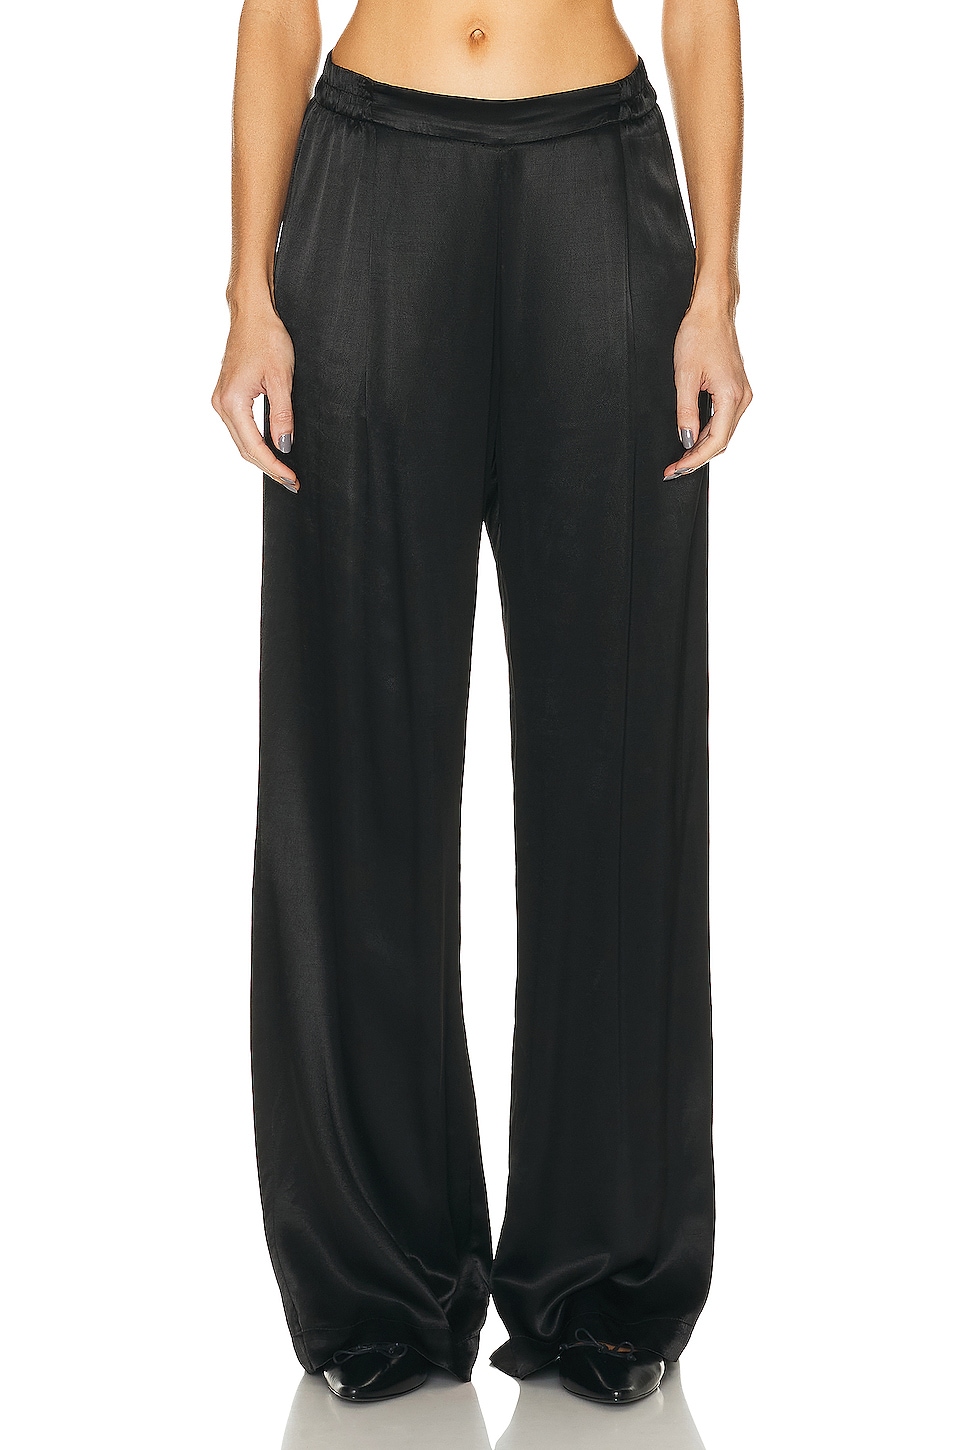 Image 1 of Enza Costa Pleated Satin Pant in Black